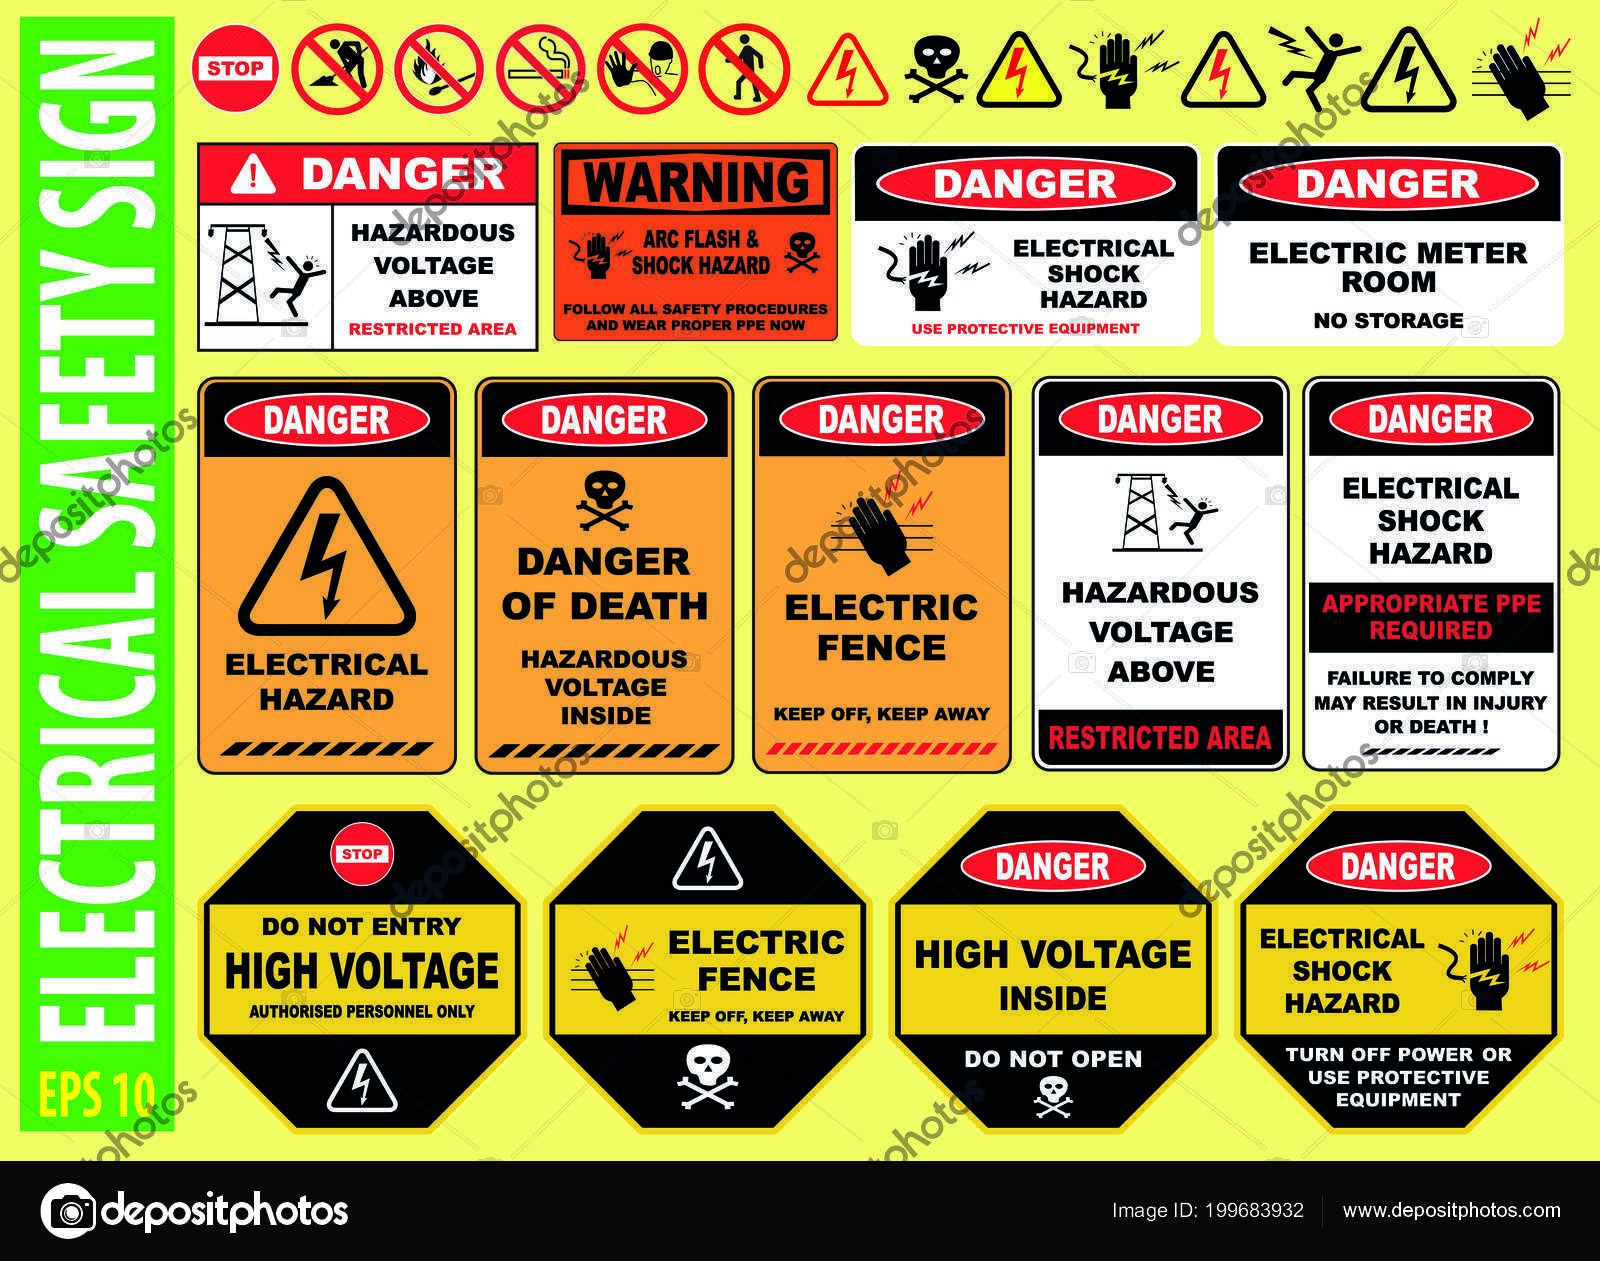 A6-150x100mm 7 Year High Quality Vinyl 230 Volts Electrical Safety Sticker 